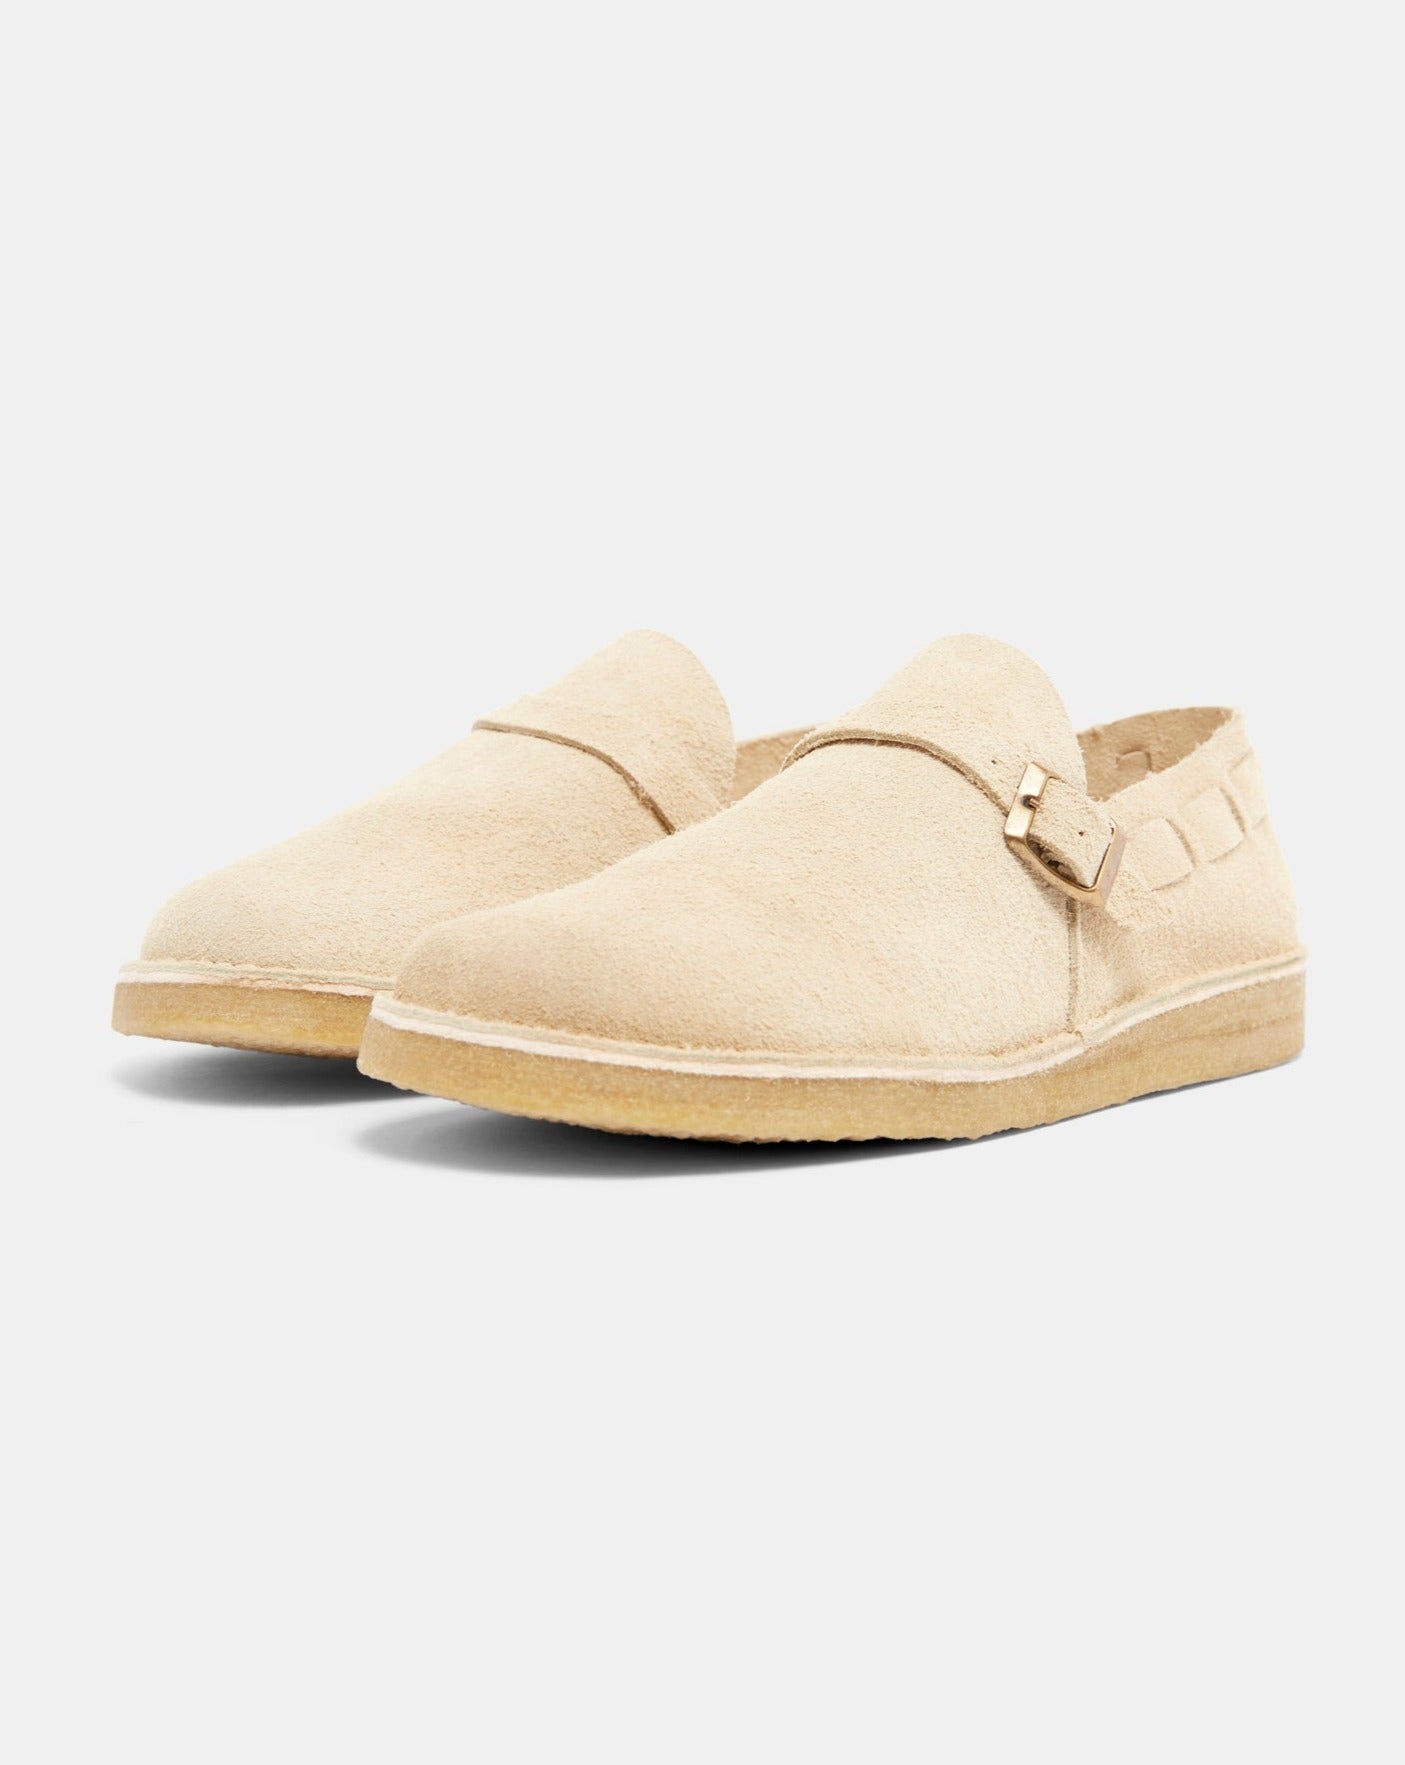 Yogi Corso Suede Hairy Sand Shoes Leather Men